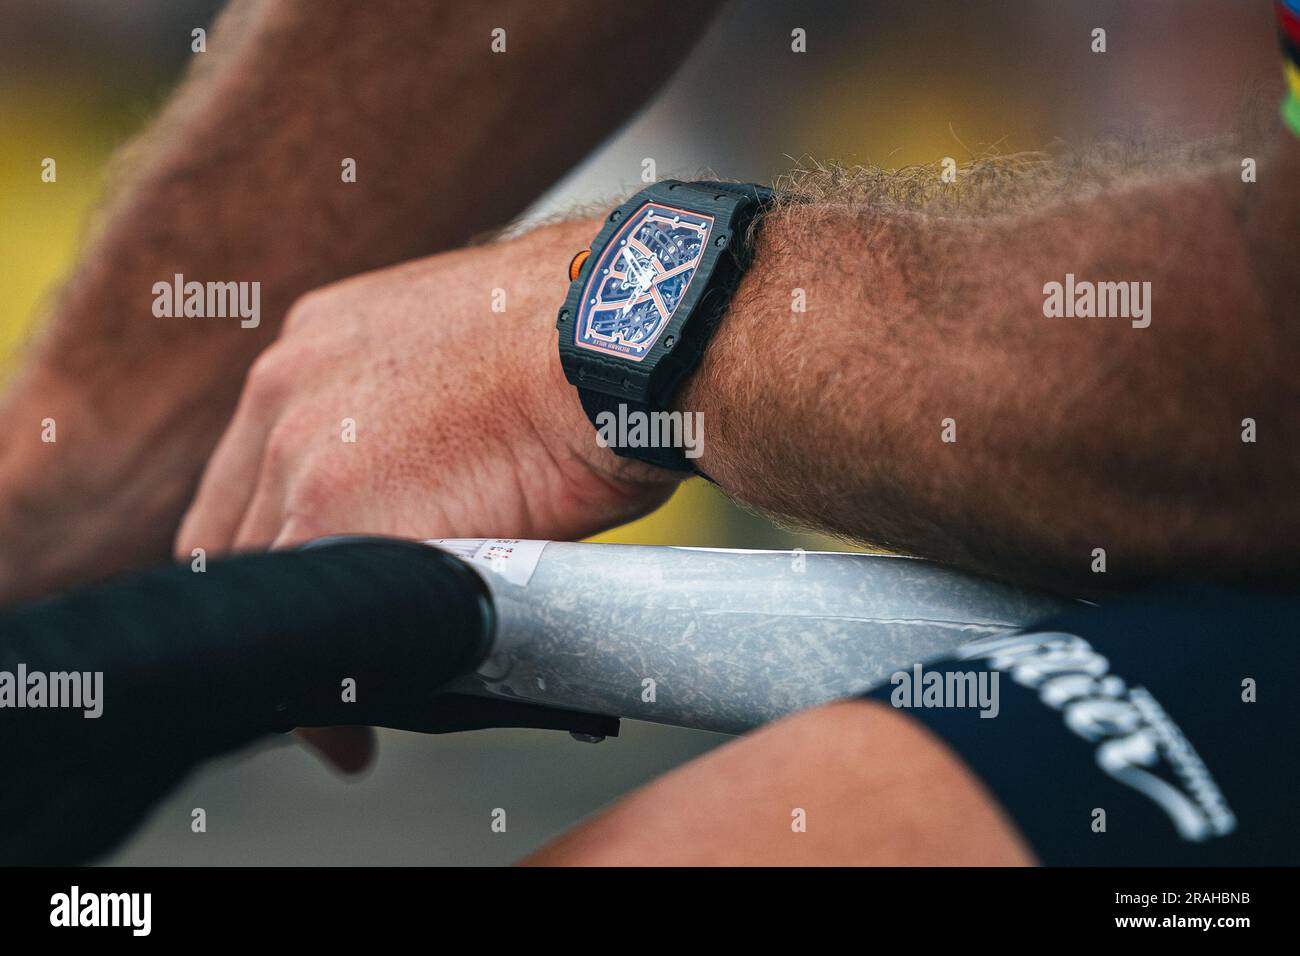 Richard Mille News, In-Depth Articles, Pictures & Videos, Page 3